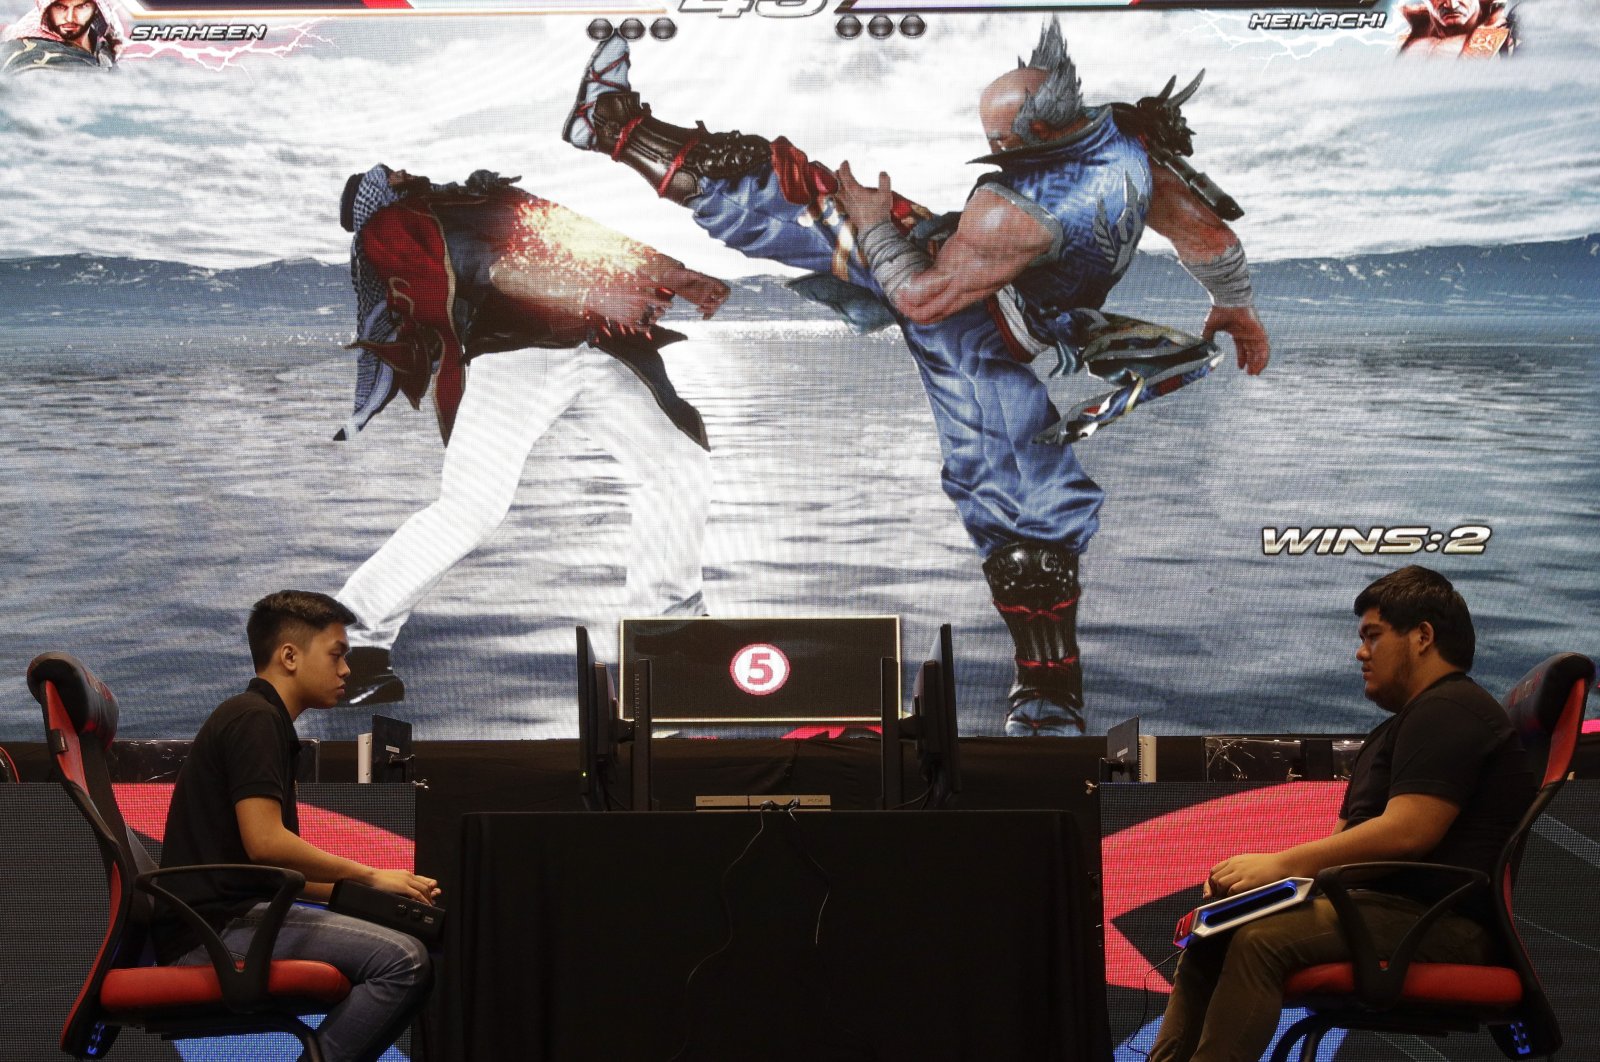 Two players battle in the video game Tekken 7 to qualify for the Philippine esports team, in Manila, Philippines, Aug. 29, 2019. (AP Photo)